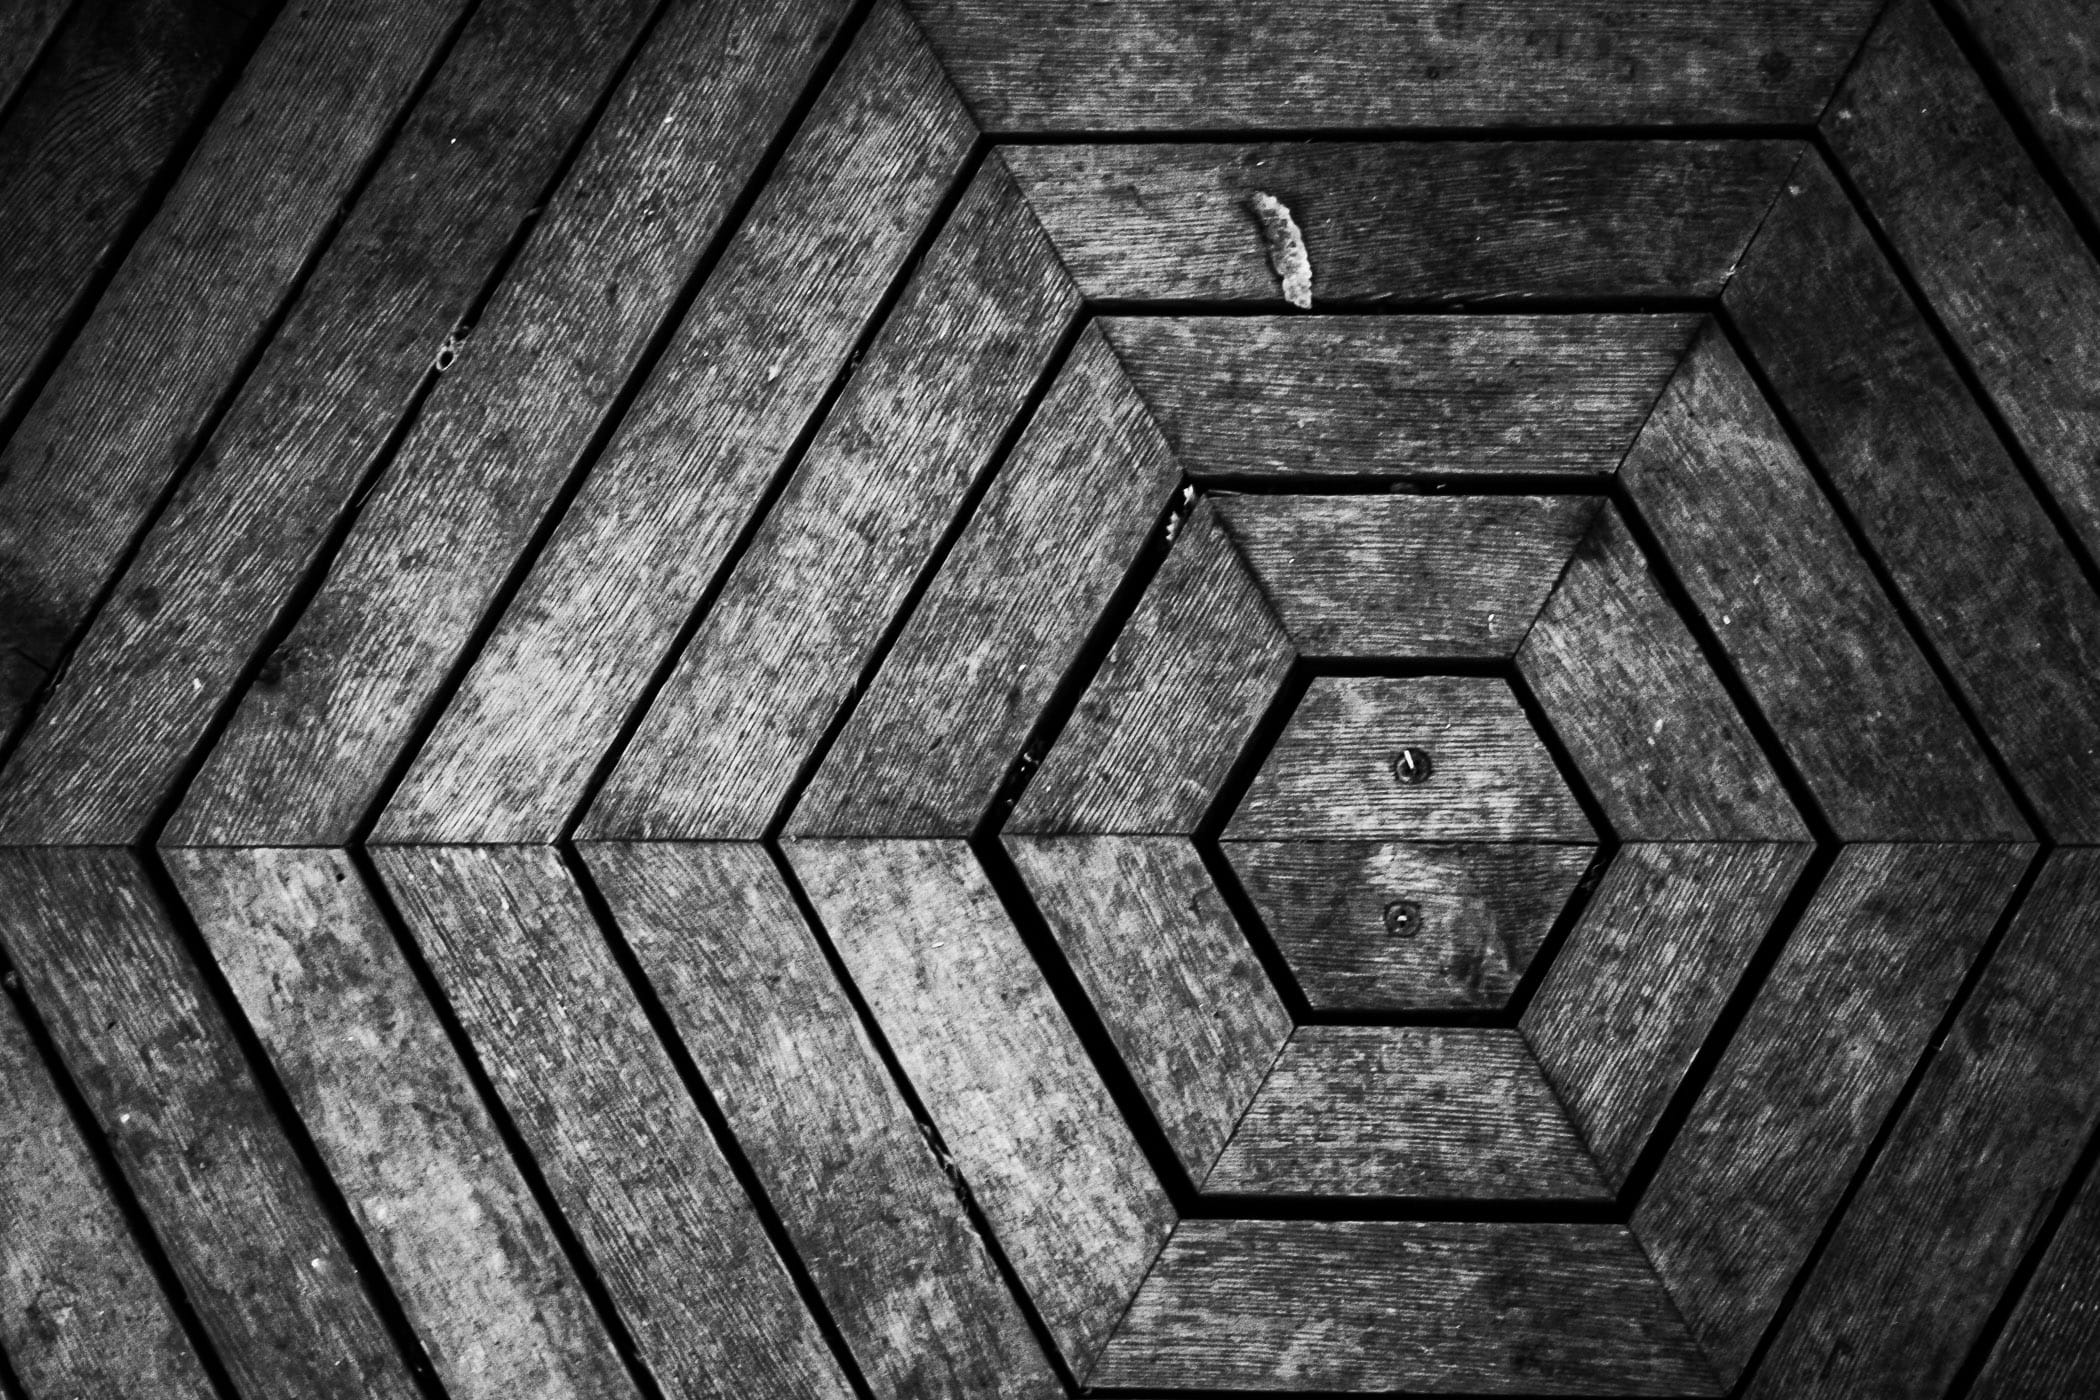 The pattern of wood making up the floor of a gazebo at the Fort Worth, Texas' Botanic Gardens vaguely reminded me of the TV show Lost's Dharma Initiative's logo.